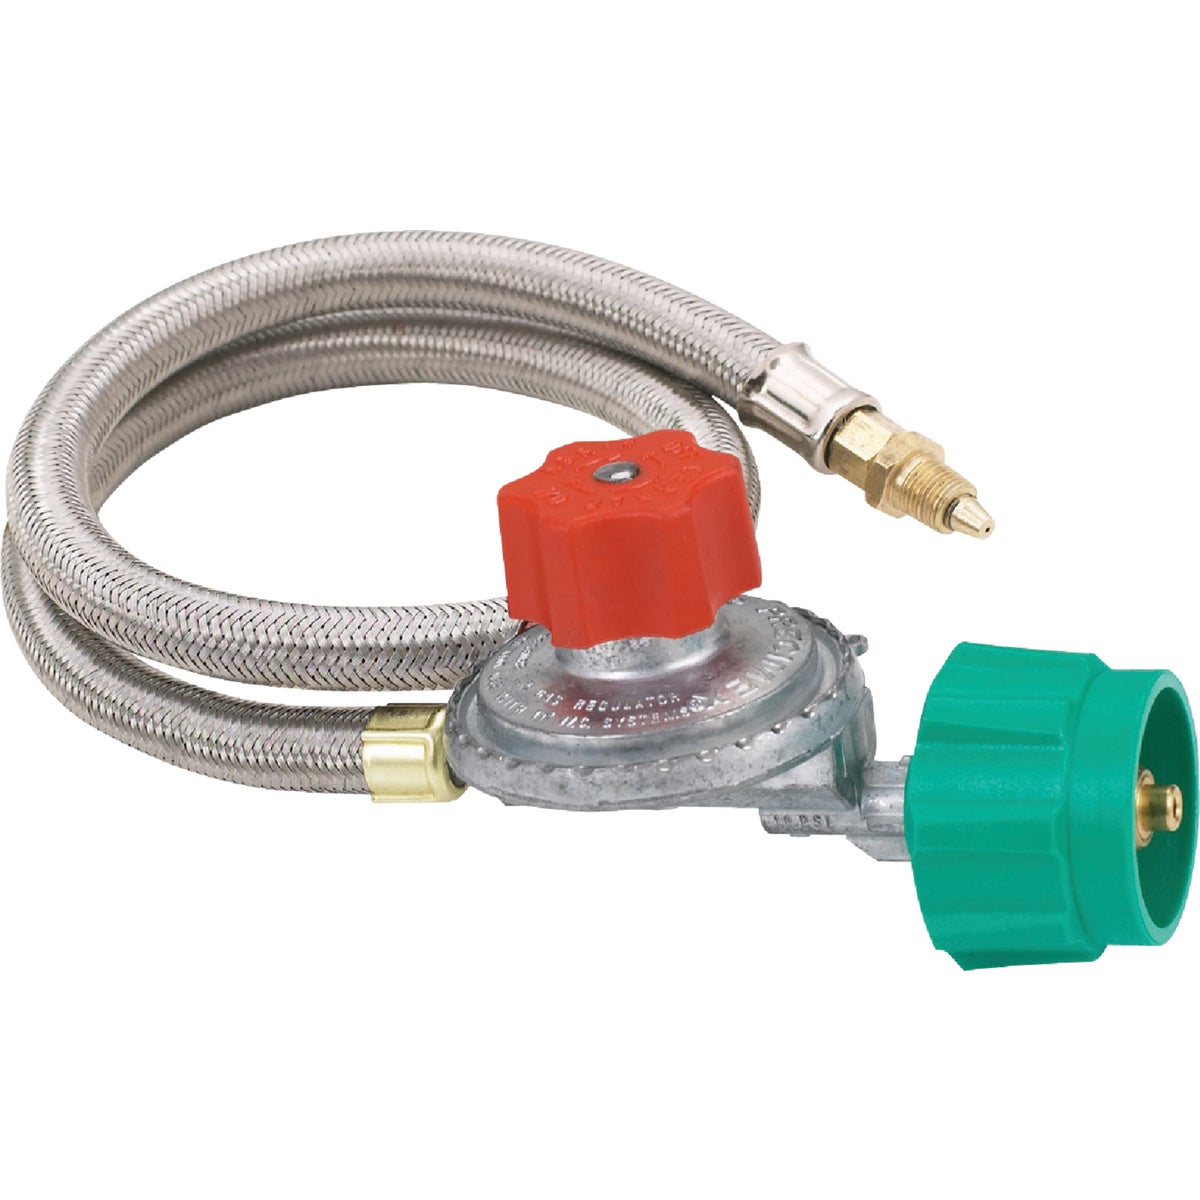 Item 803634, 3 Ft. stainless braided hose with 5 psi adjustable regulator. 1/8 In.